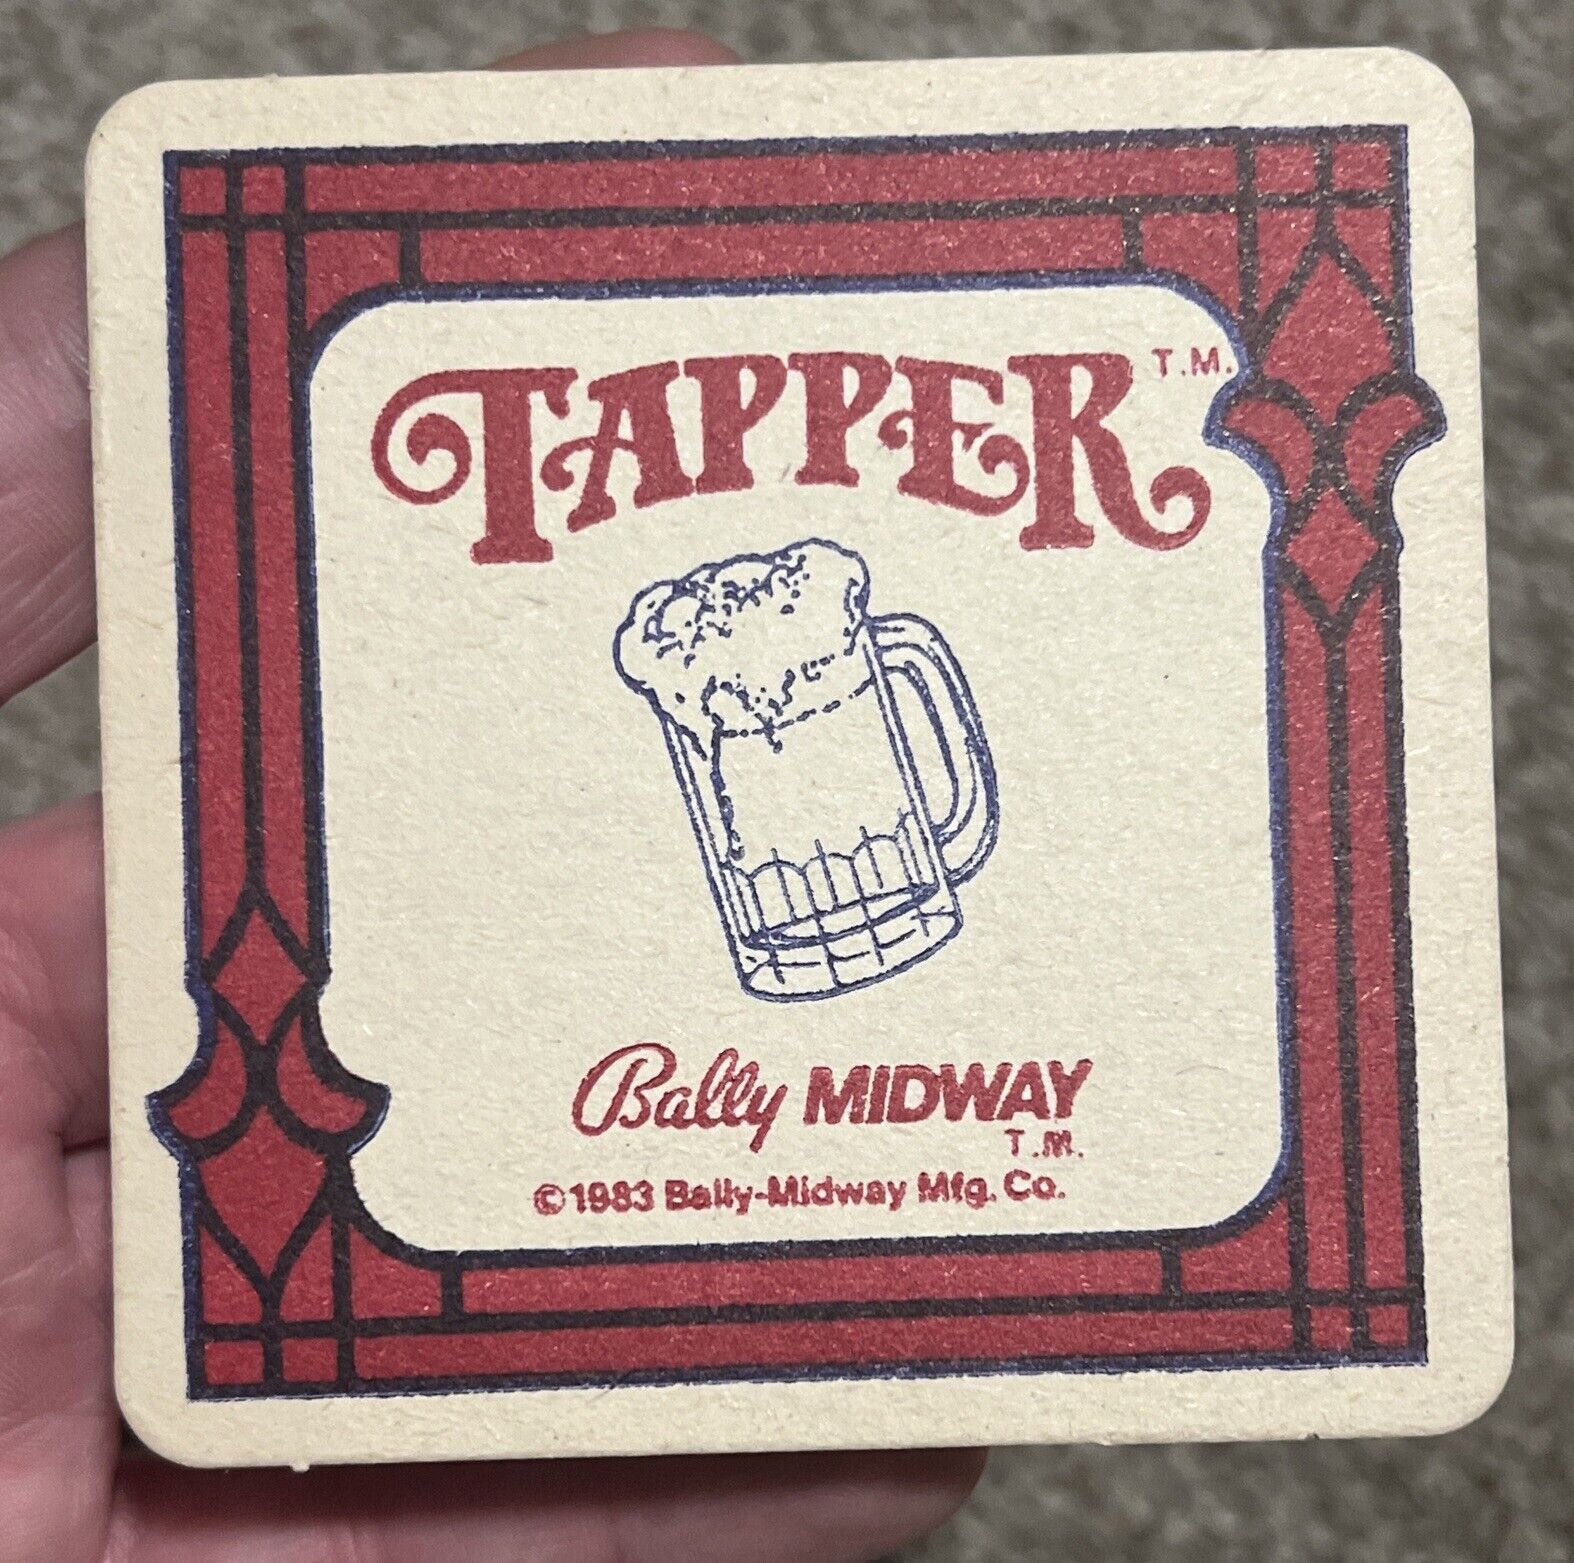 🔥Vintage 1983 Tapper Bally Midway Advertising Beer Coaster Video Game VHTF NM+